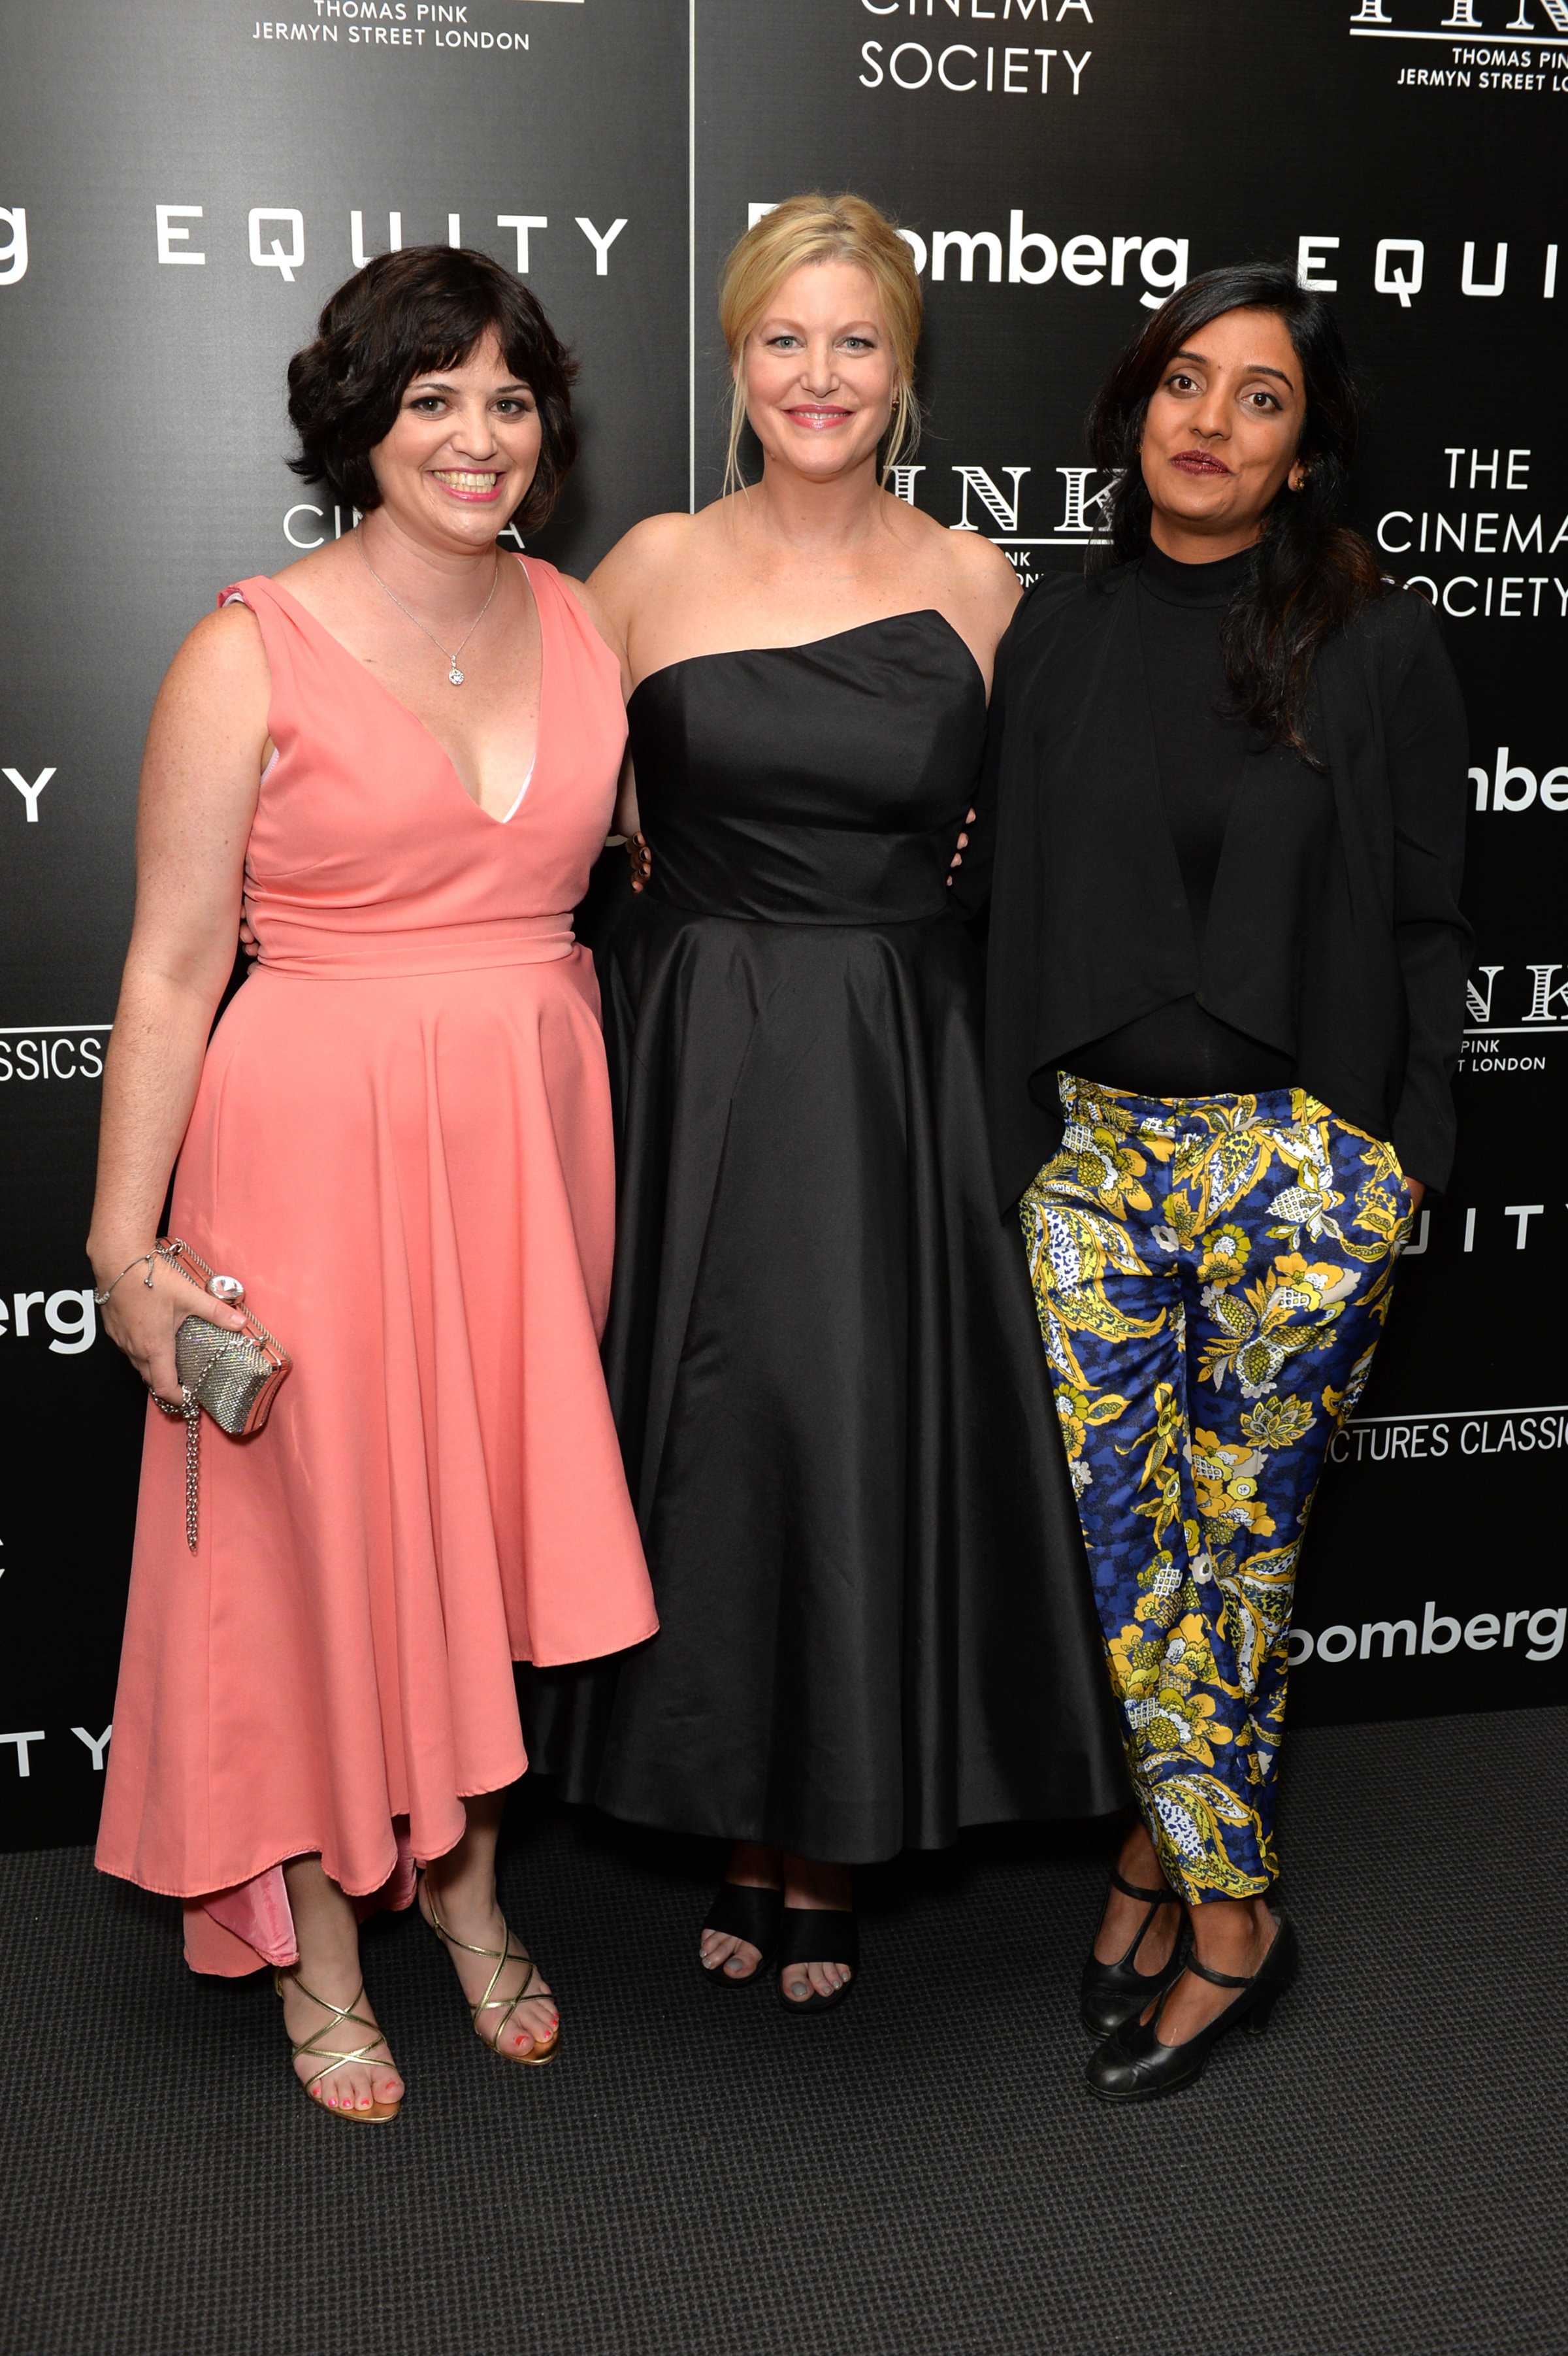 Screenwriter Amy Fox, actor Anna Gunn and director Meera Menon attend a screening of "Equity" on July 26, 2016 in New York City.